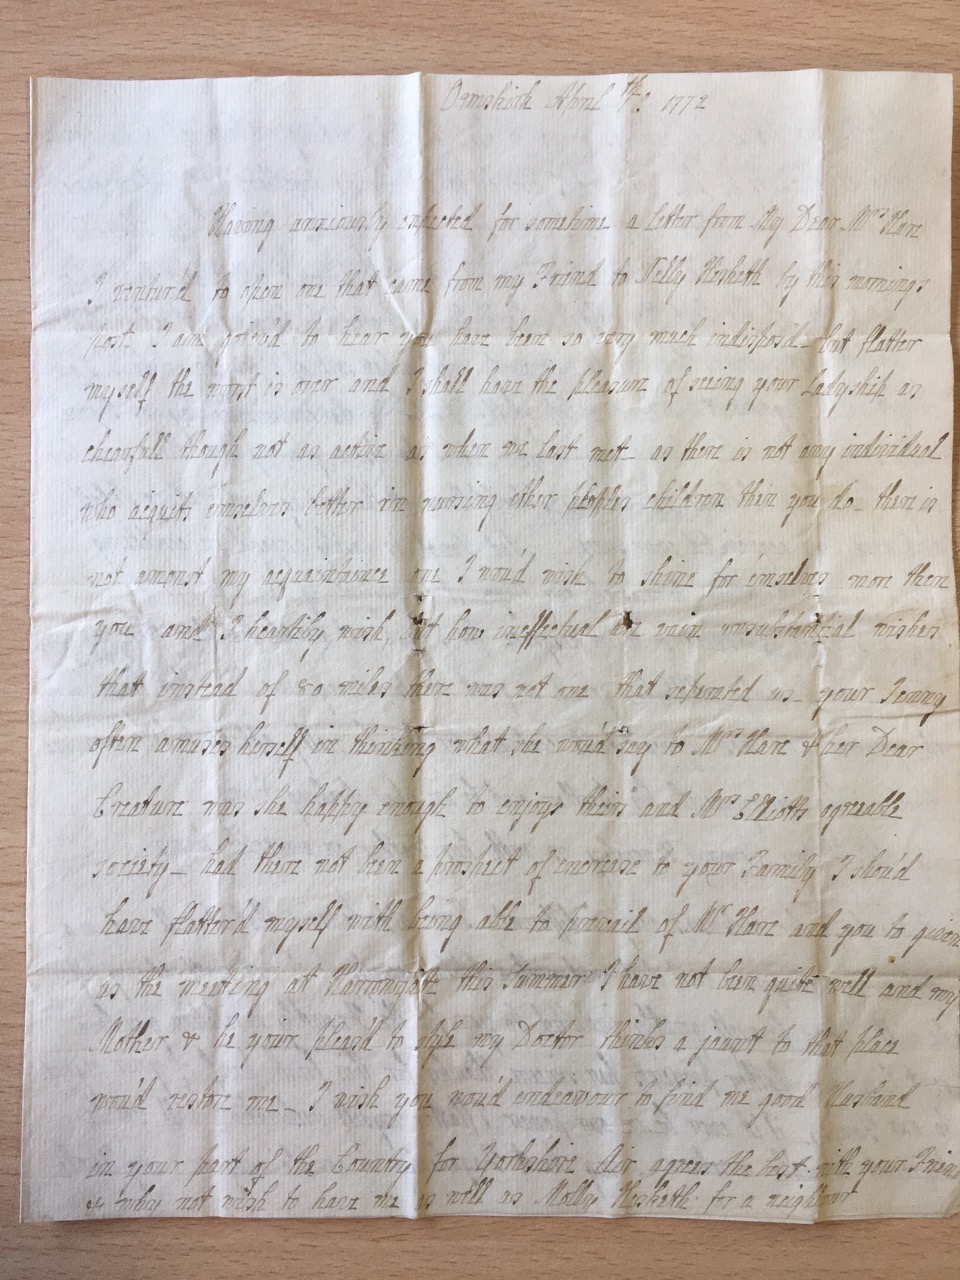 Image #1 of letter: J[enny] Brownsword to Ann Hare, 12 April 1772